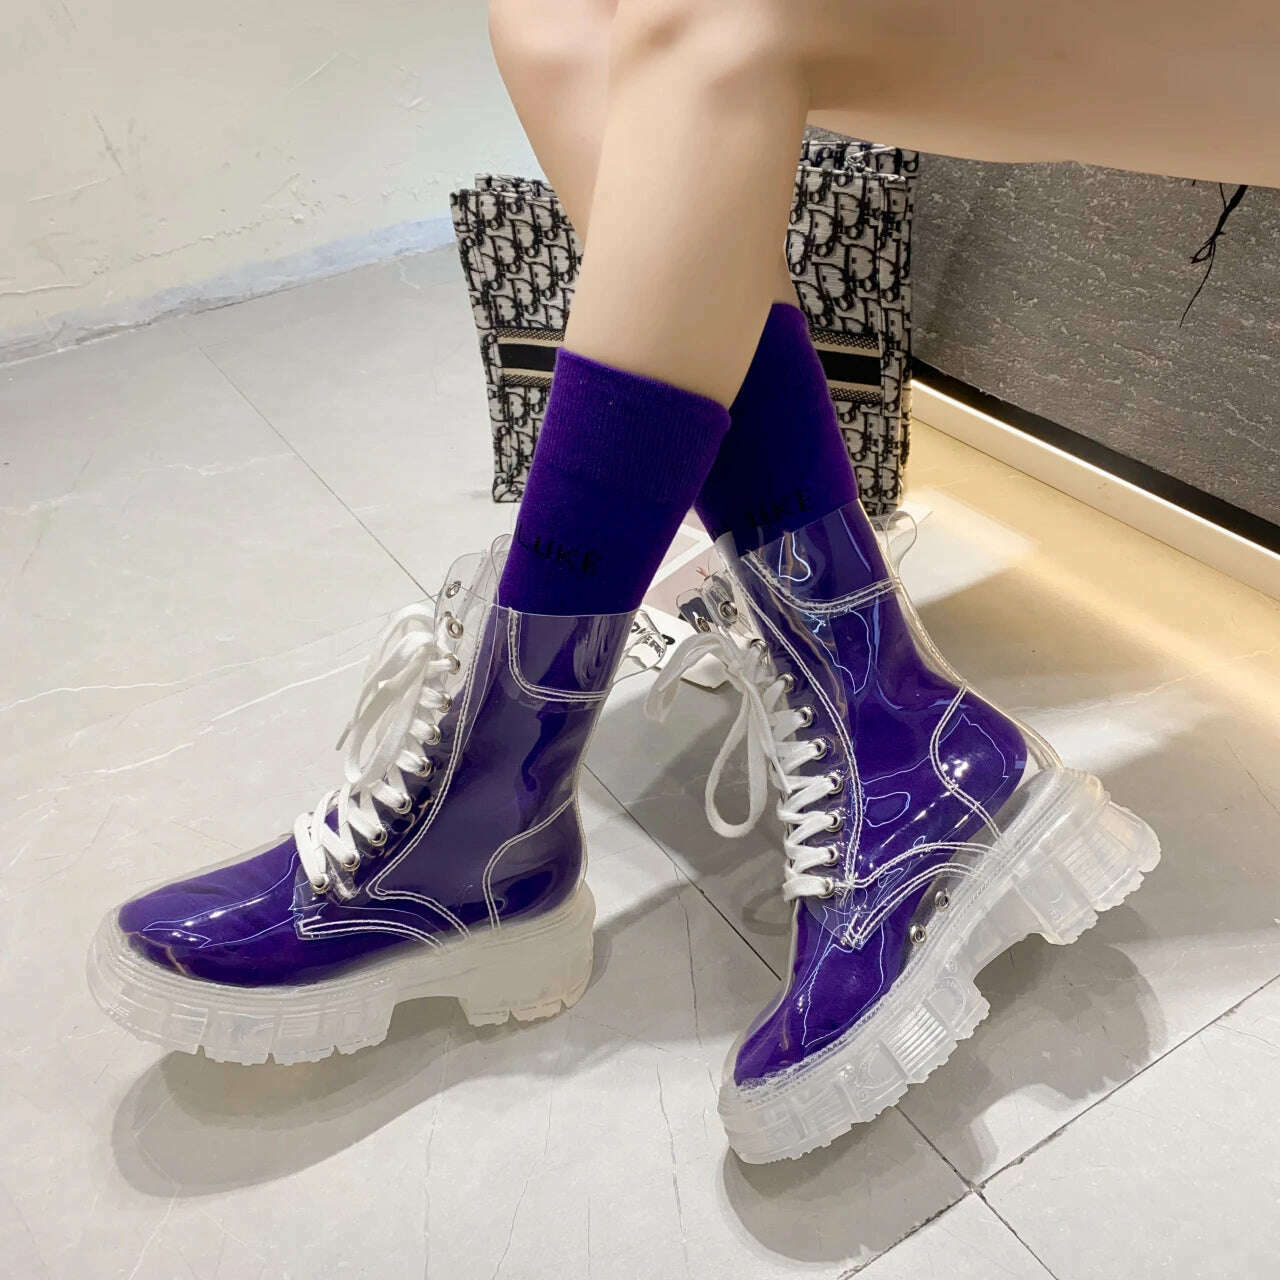 KIMLUD, 2022 Cool Fashion Women Transparent Platform Boots Waterproof Ankle Boots Feminine Clear Heel Short Boots Sexy Female Rain Shoes, KIMLUD Womens Clothes